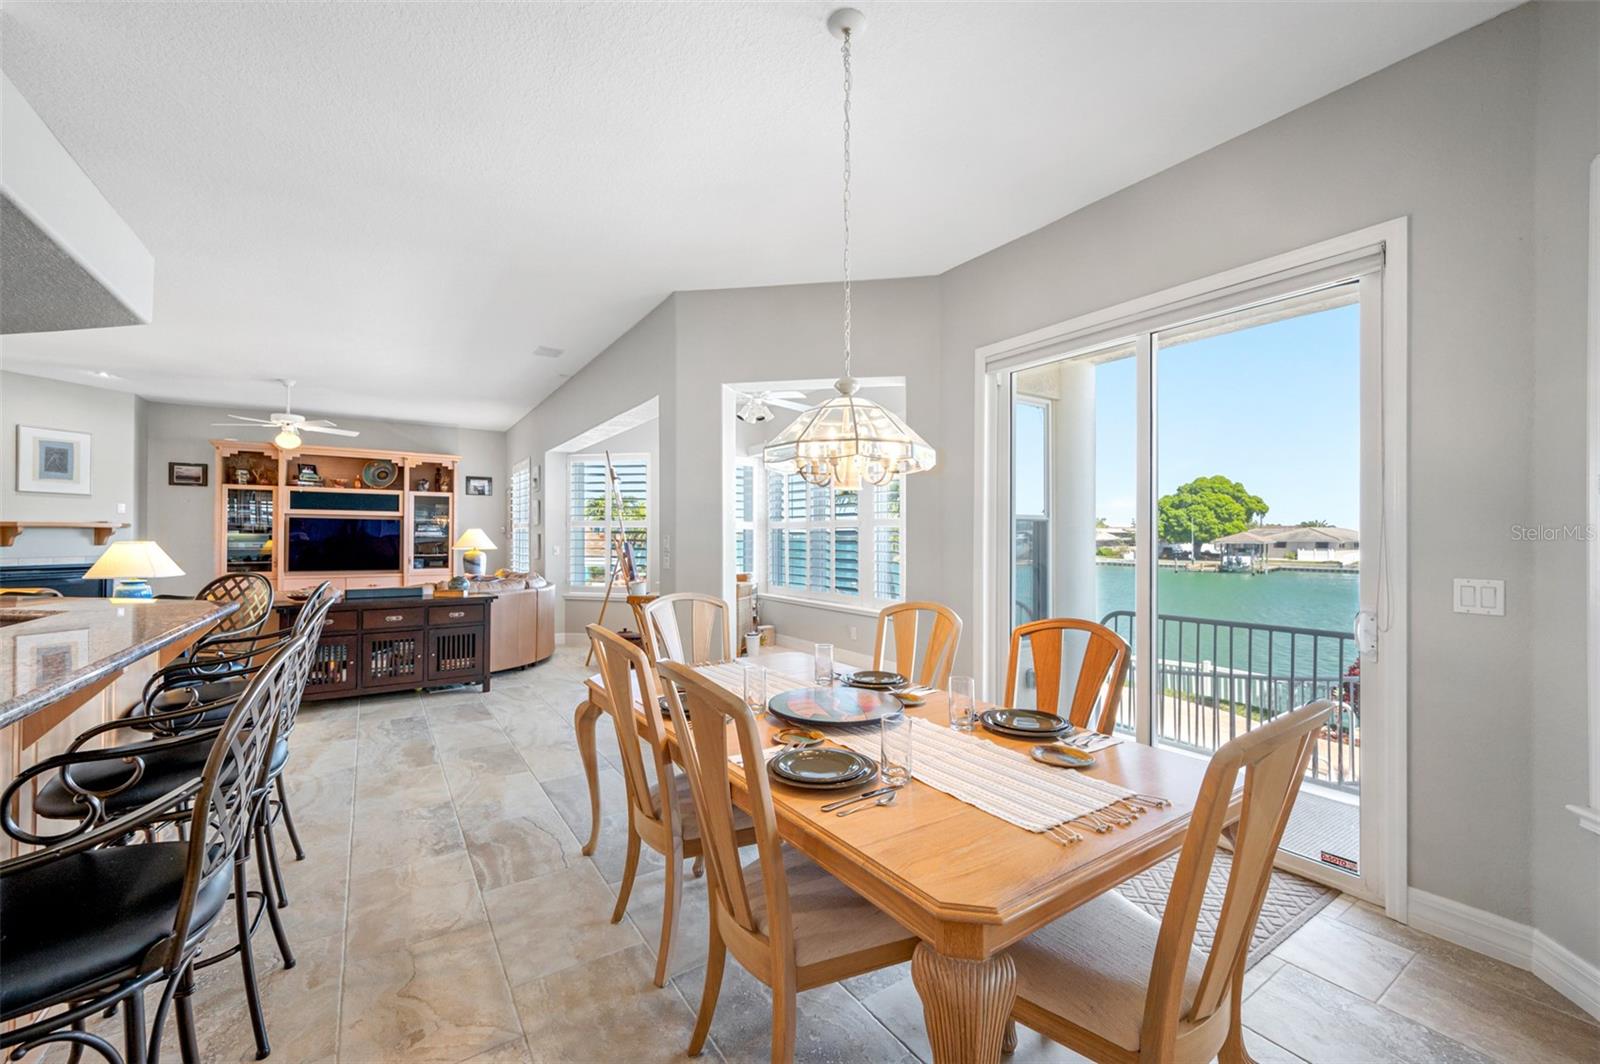 Large breakfast/dining area overlooking the water and adjacent to the kitchen and family room